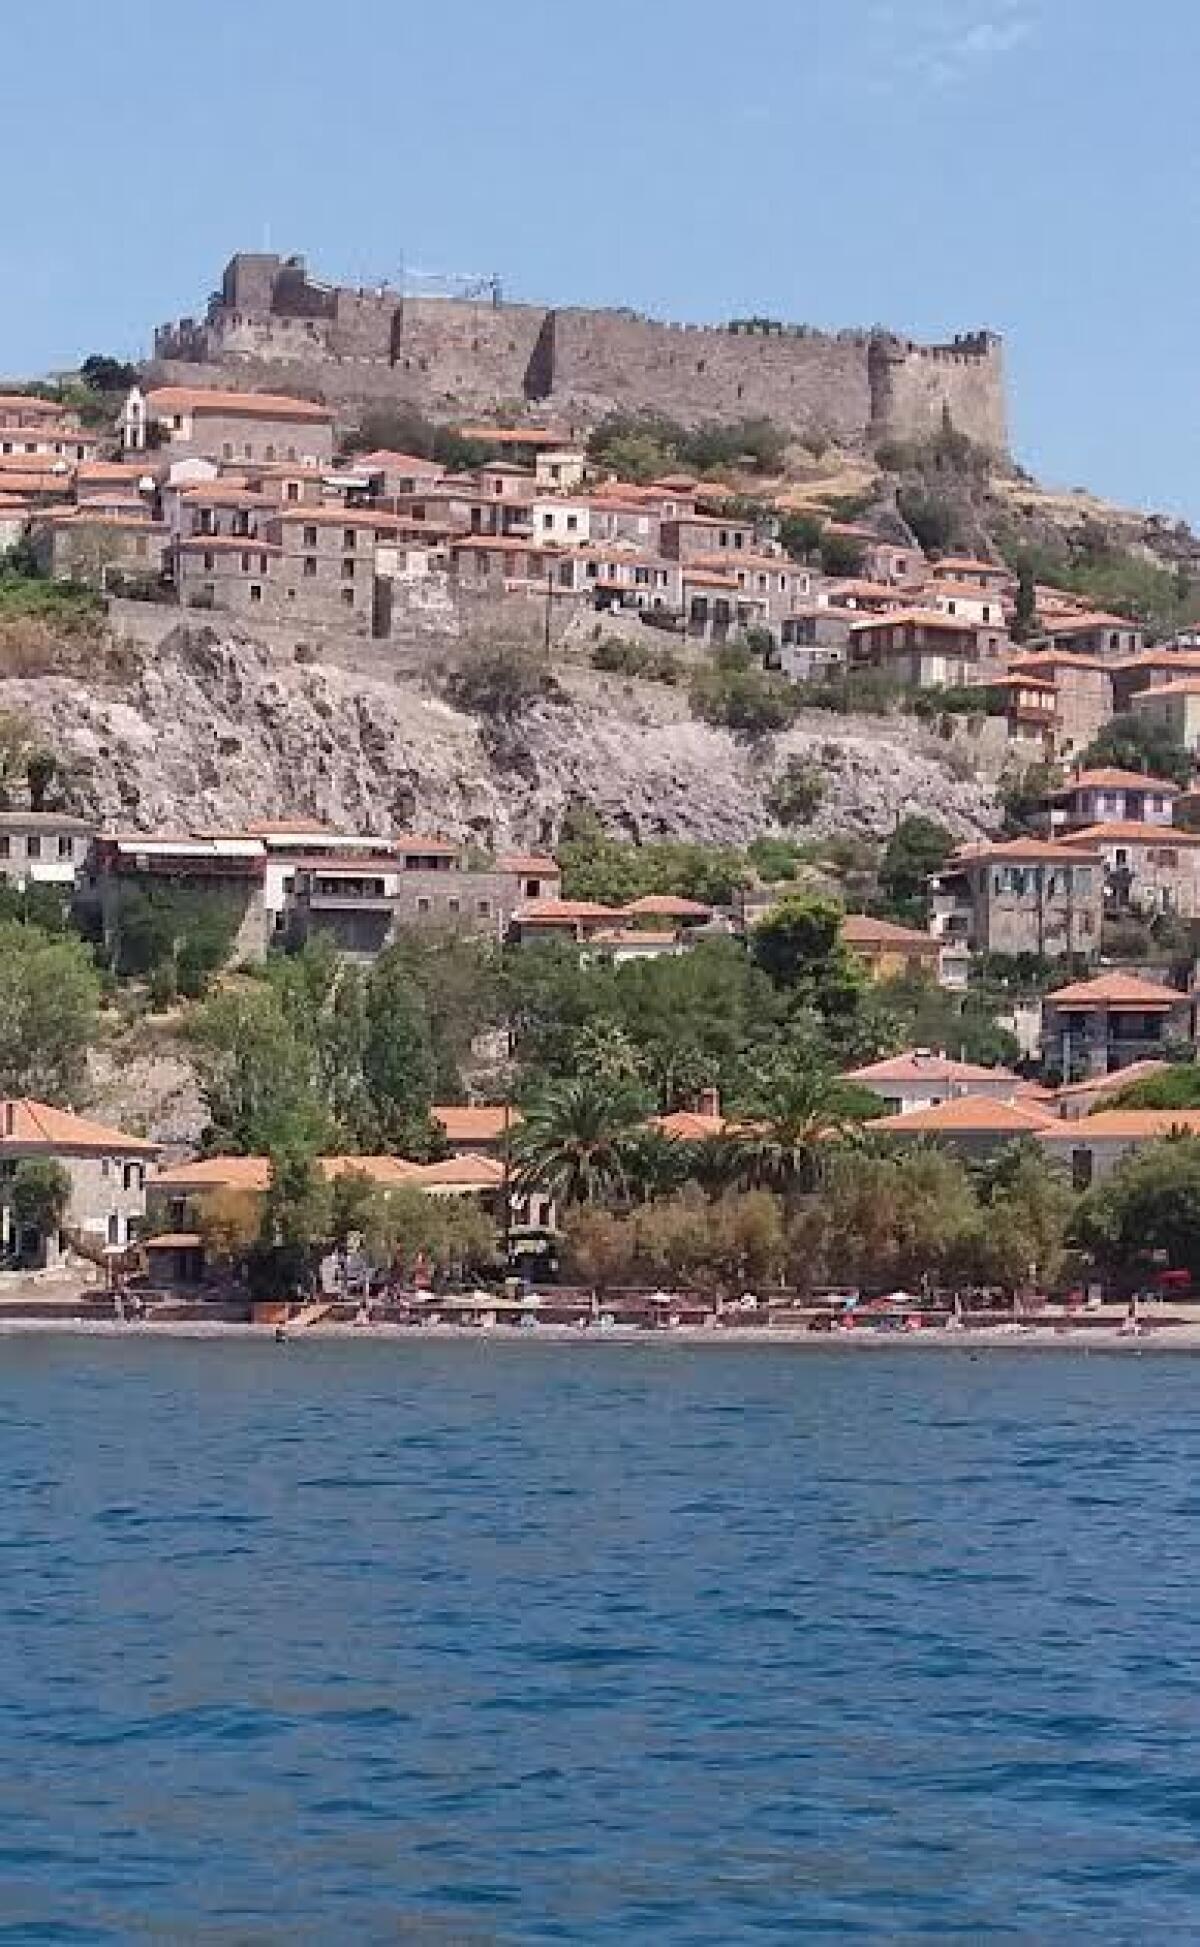 A general view of Molyvos, Greece.